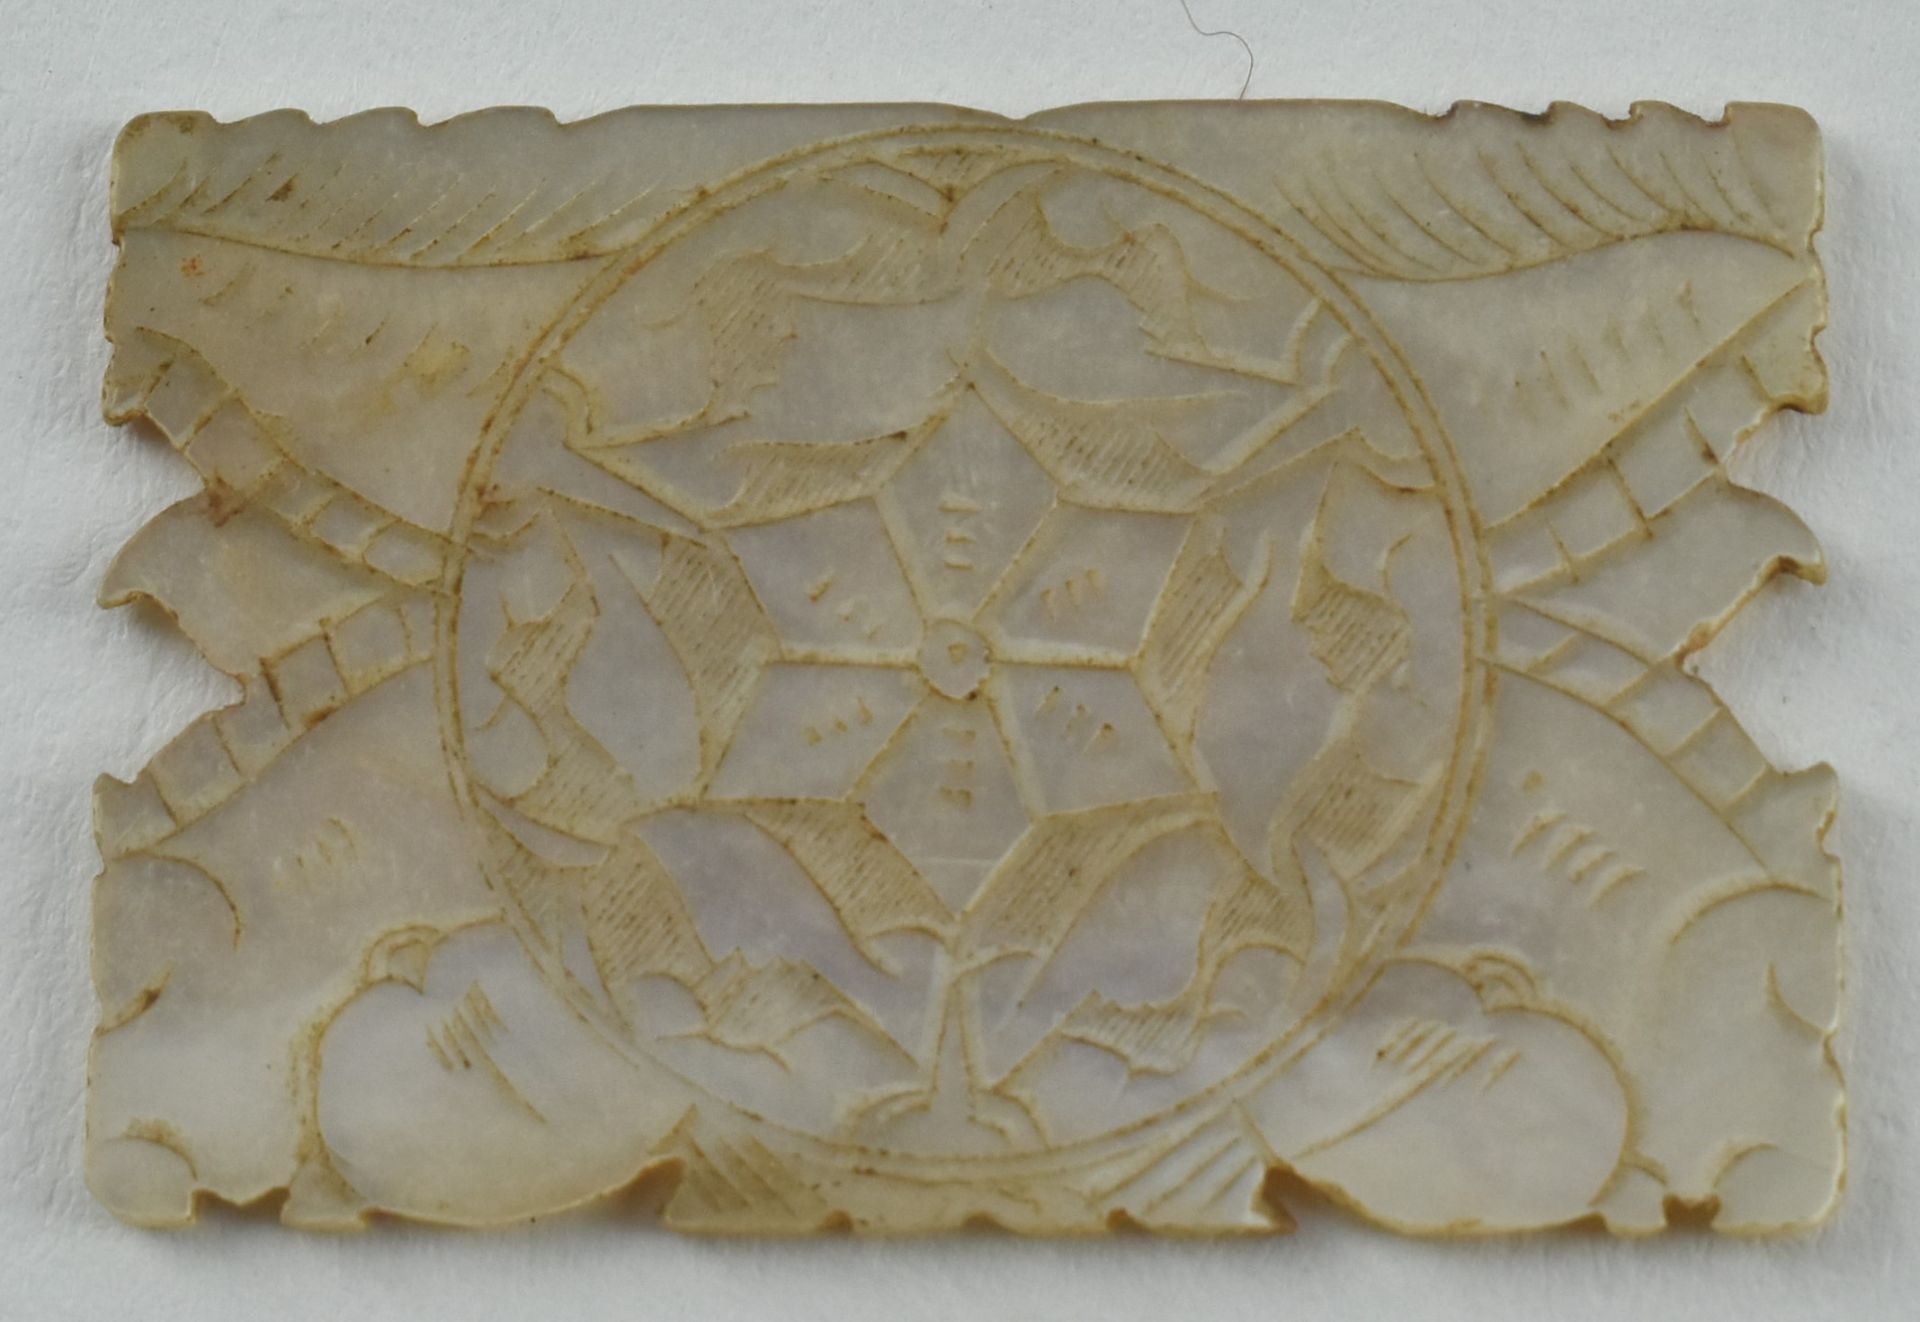 QING DYNASTY MOTHER OF PEARL GAMING TOKENS 清十三行贝母筹码 - Image 7 of 11